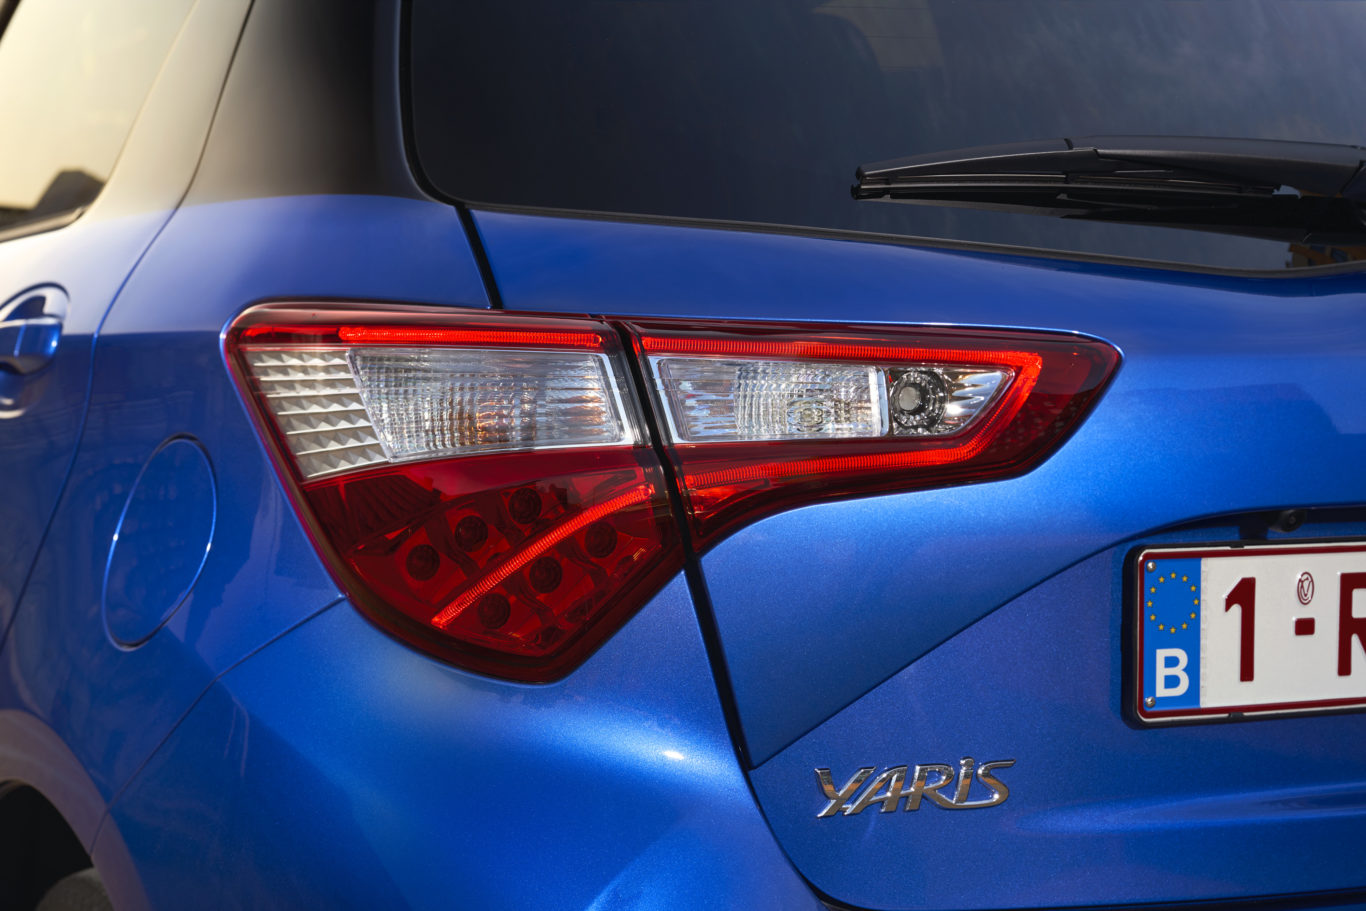 The Yaris Hybrid remains relatively unchallenged in the compact hybrid segment